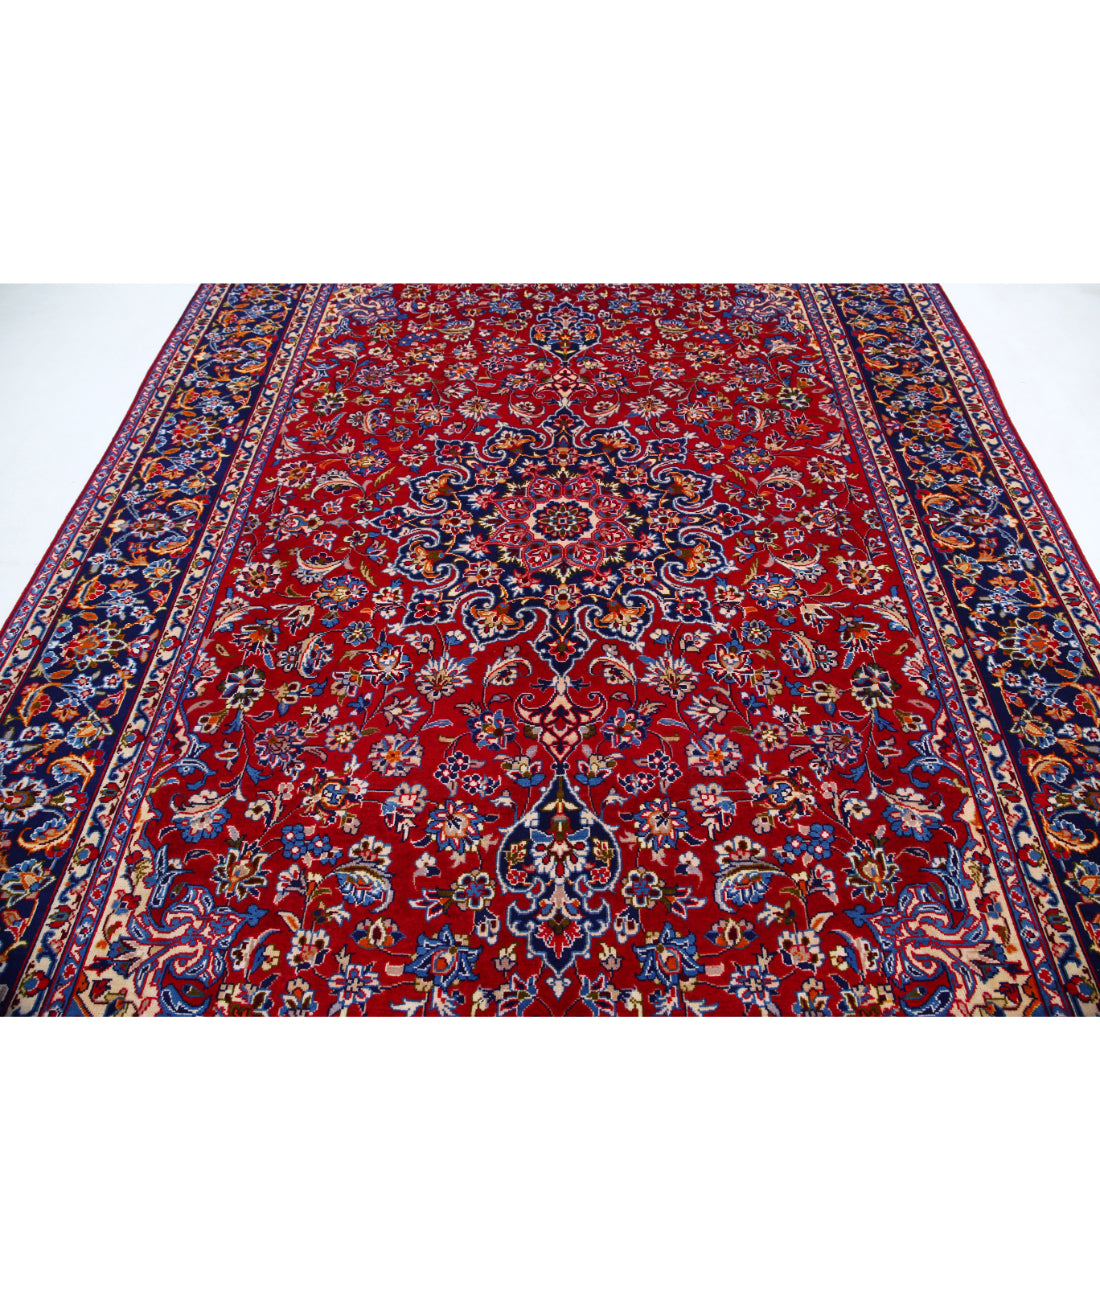 Hand Knotted Persian Kashan Wool Rug - 8'0'' x 12'0'' 8'0'' x 12'0'' (240 X 360) / Red / Blue